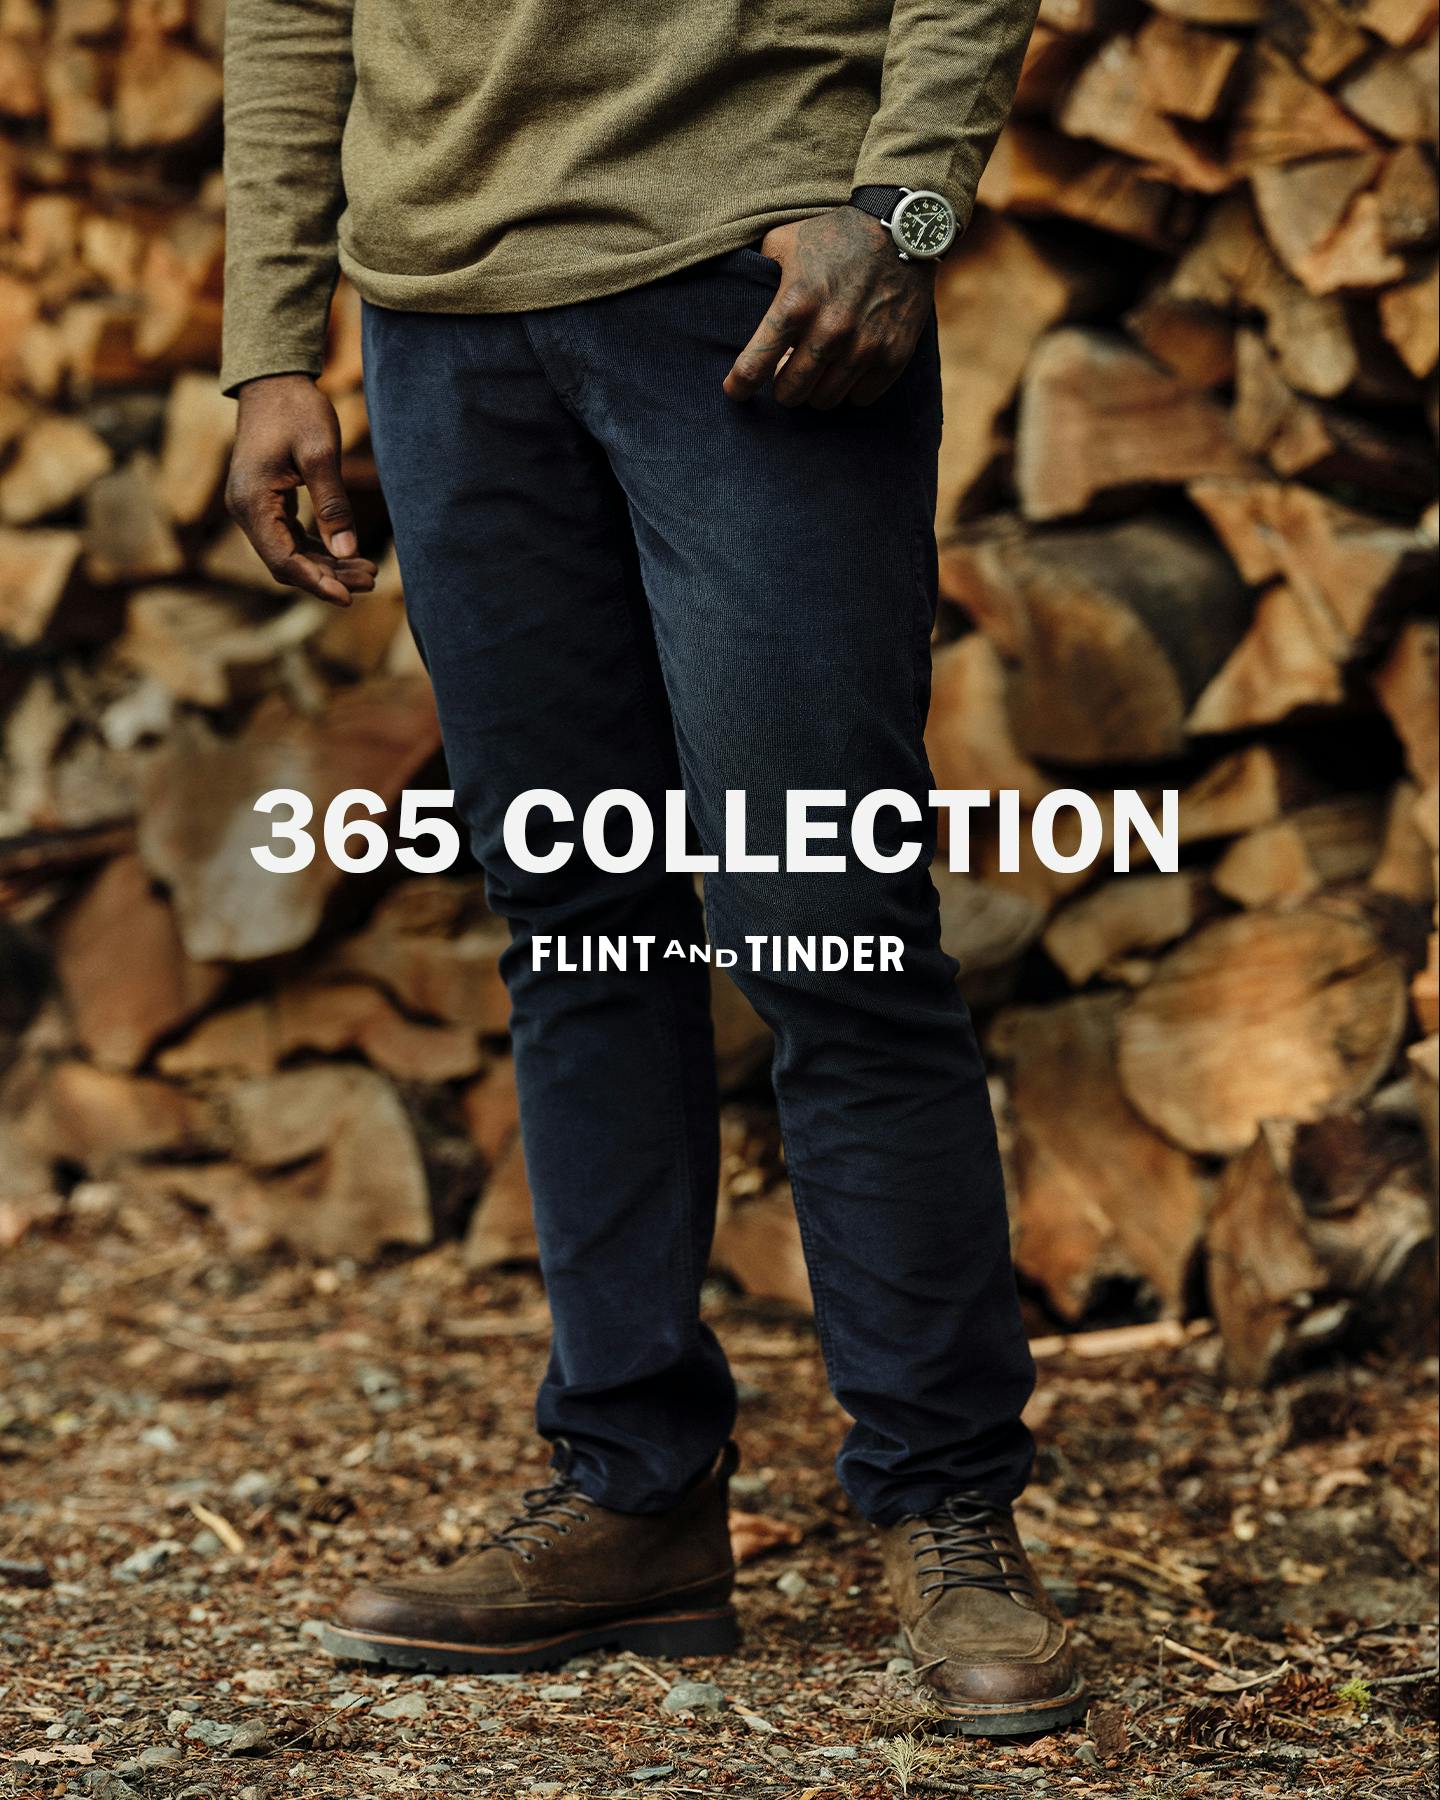 365 Collection - Flint and Tinder